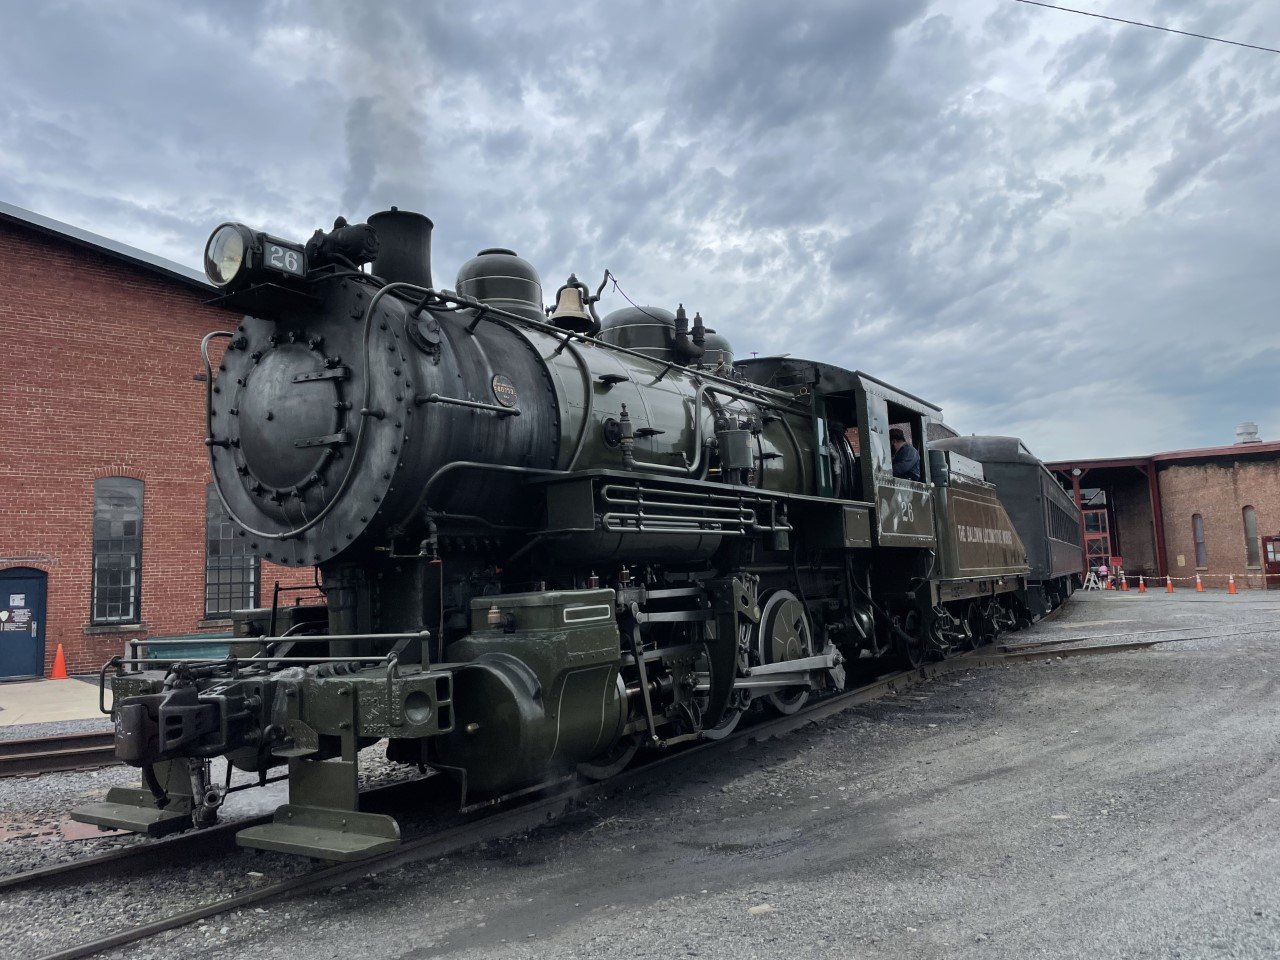 Train rides have officially returned to the Steamtown National Historic Site. Here, the Baldwin Locomotive Works No. 26 rests on the track at Steamtown.